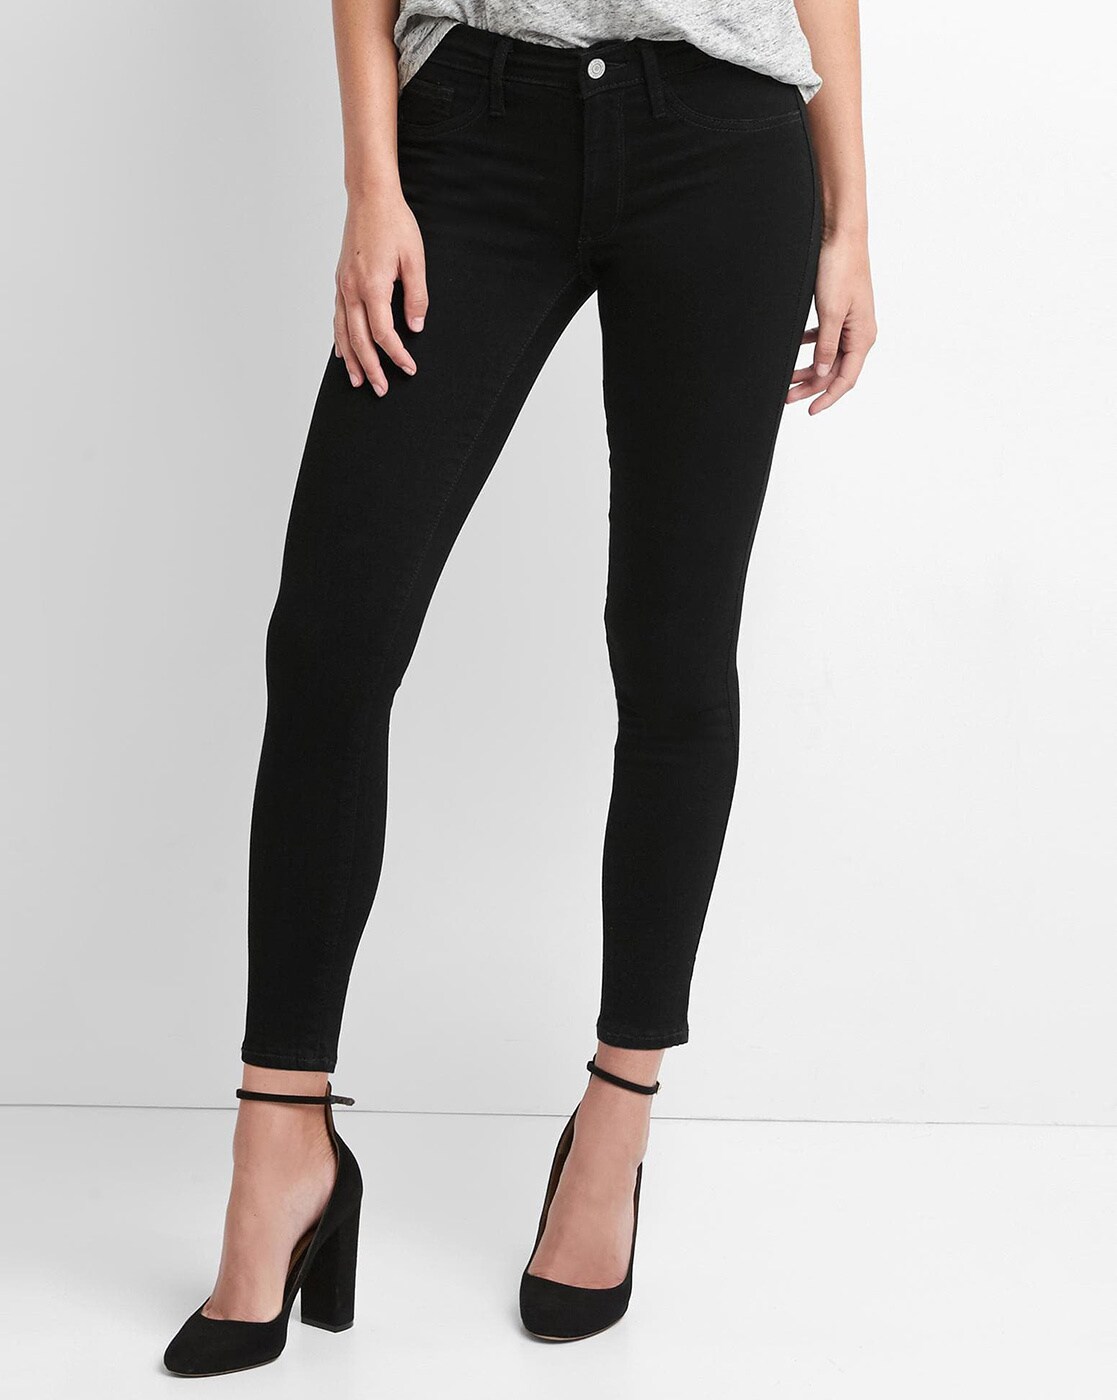 black cropped skinny jeans womens